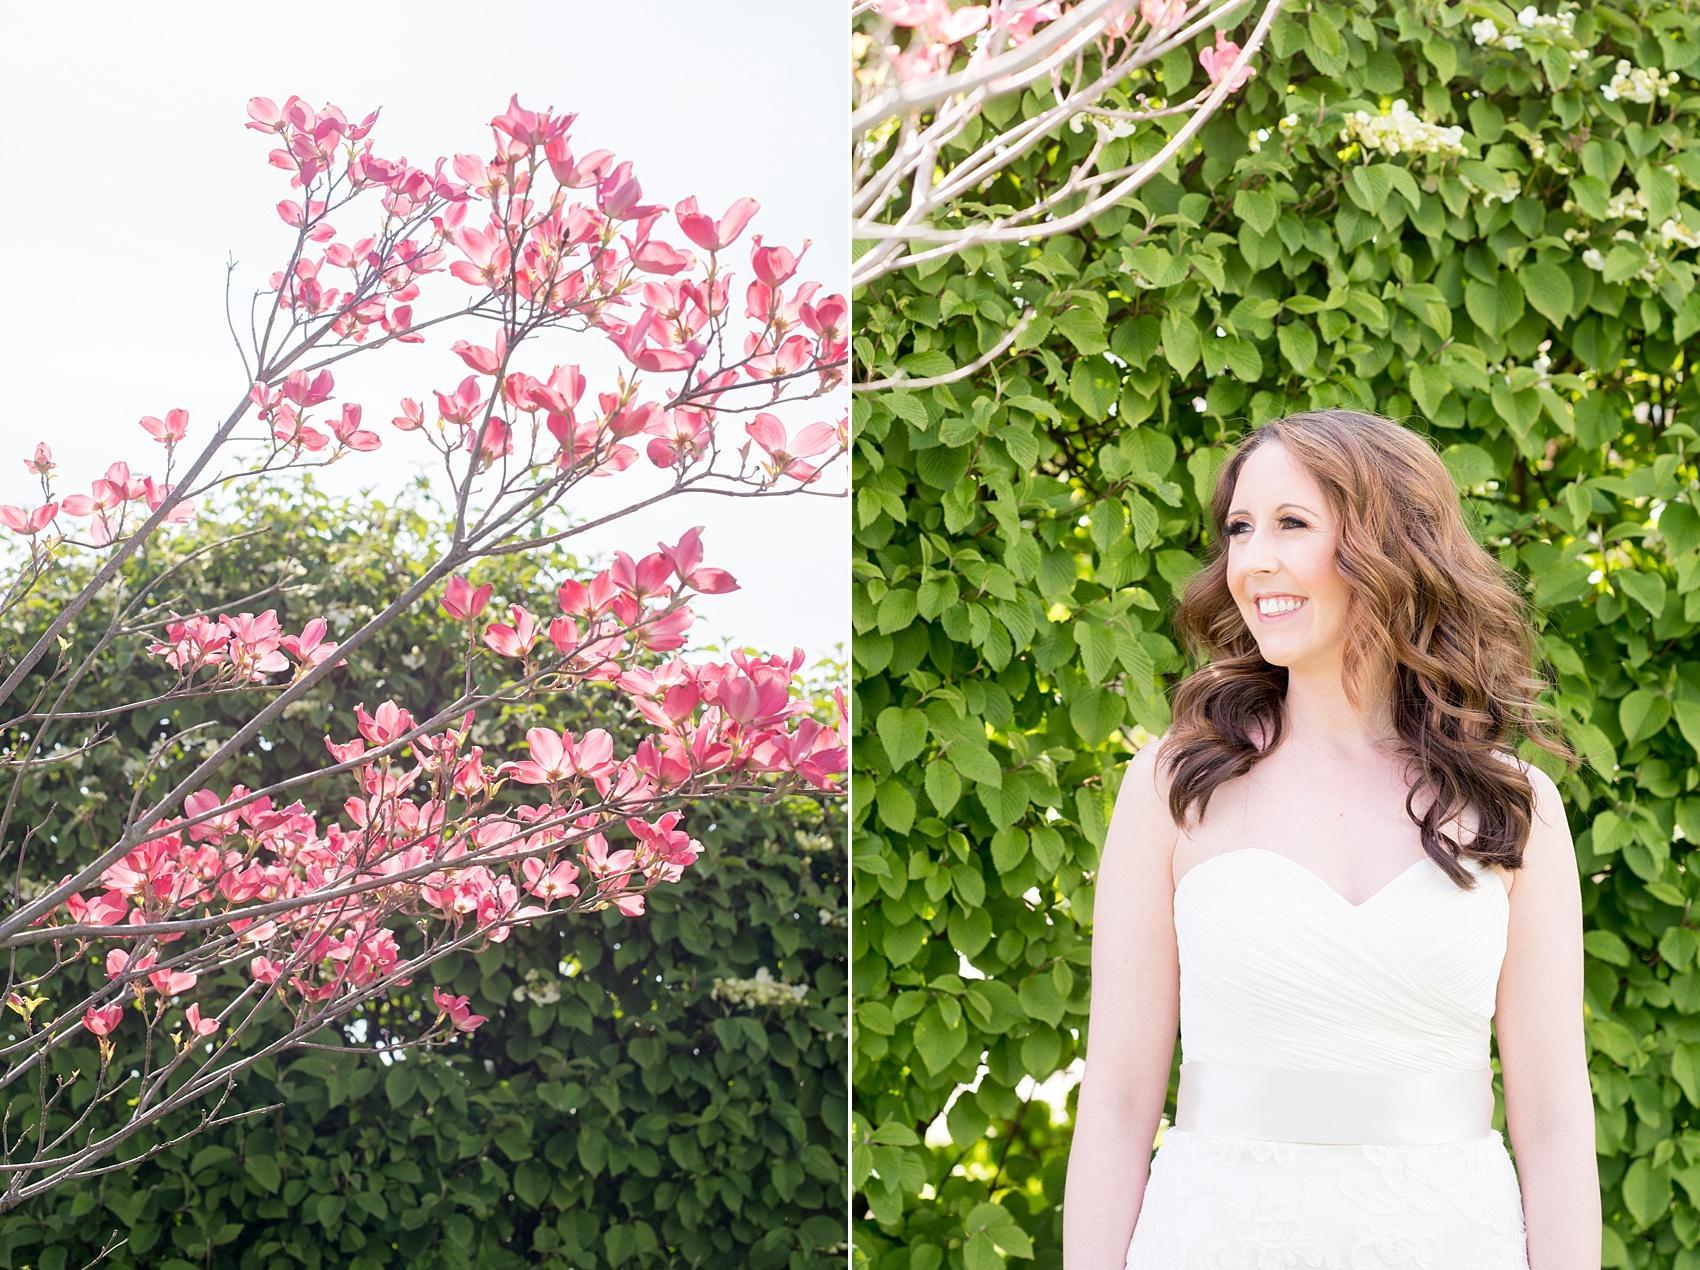 Photos by Mikkel Paige Photography for a wedding at Harbor Club on Long Island. Bride in a strapless white gown with pink spring dogwood flowers.